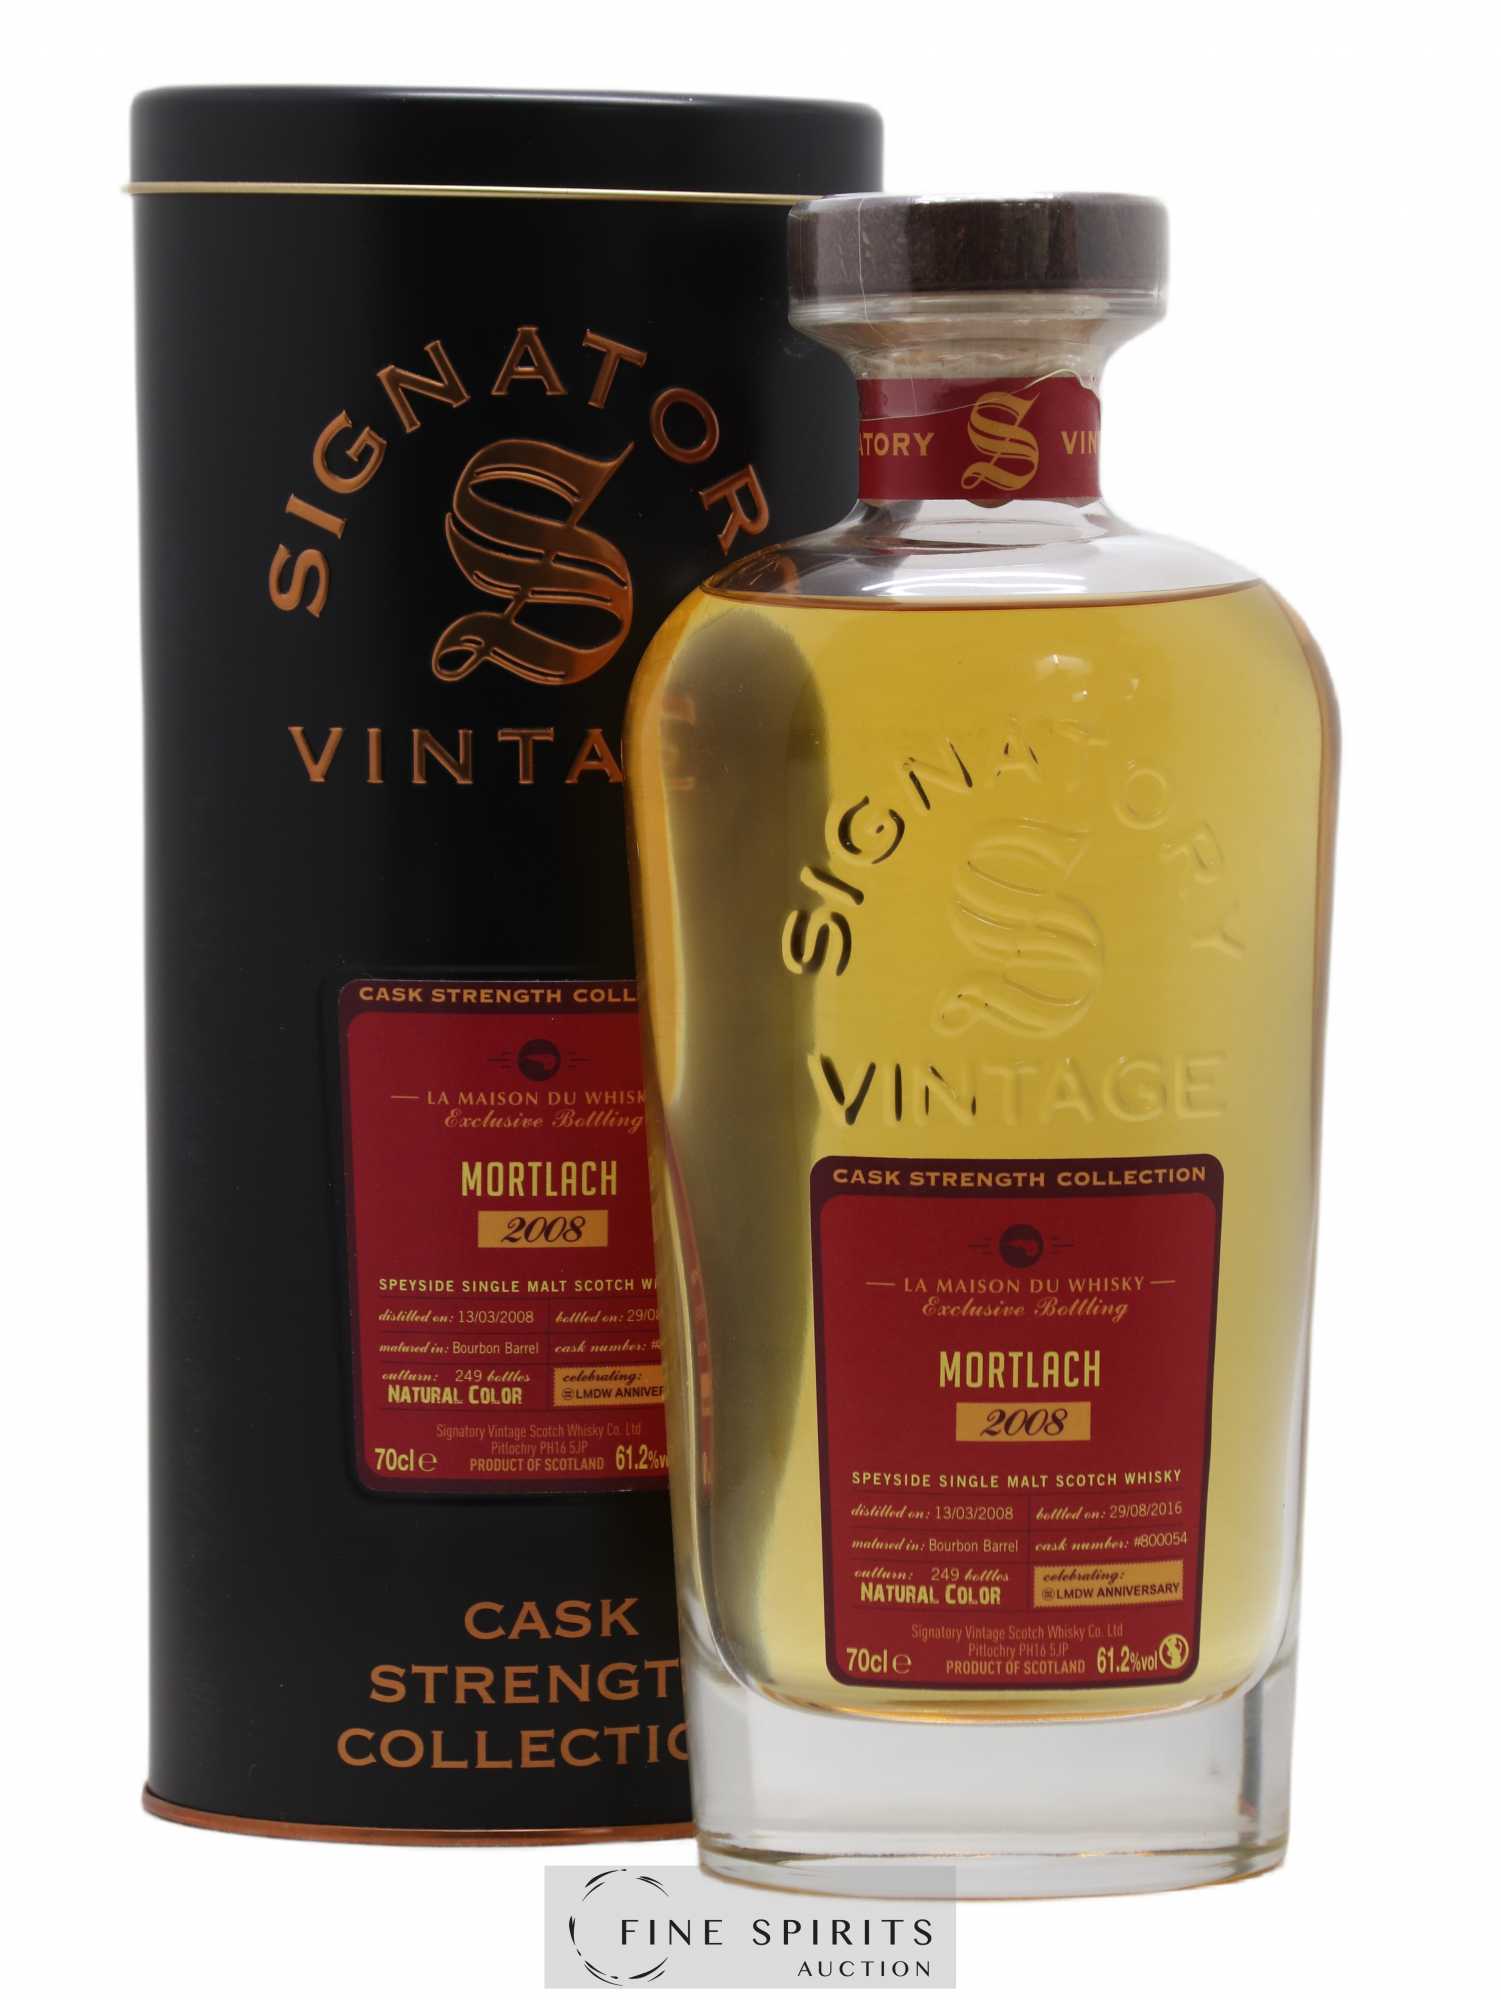 Mortlach 2008 Signatory Vintage Exclusive Bottling Bourbon Barrel n°800054 - One of 249 - bottled 2016 LMDW Anniversary Cask Strength Collection 